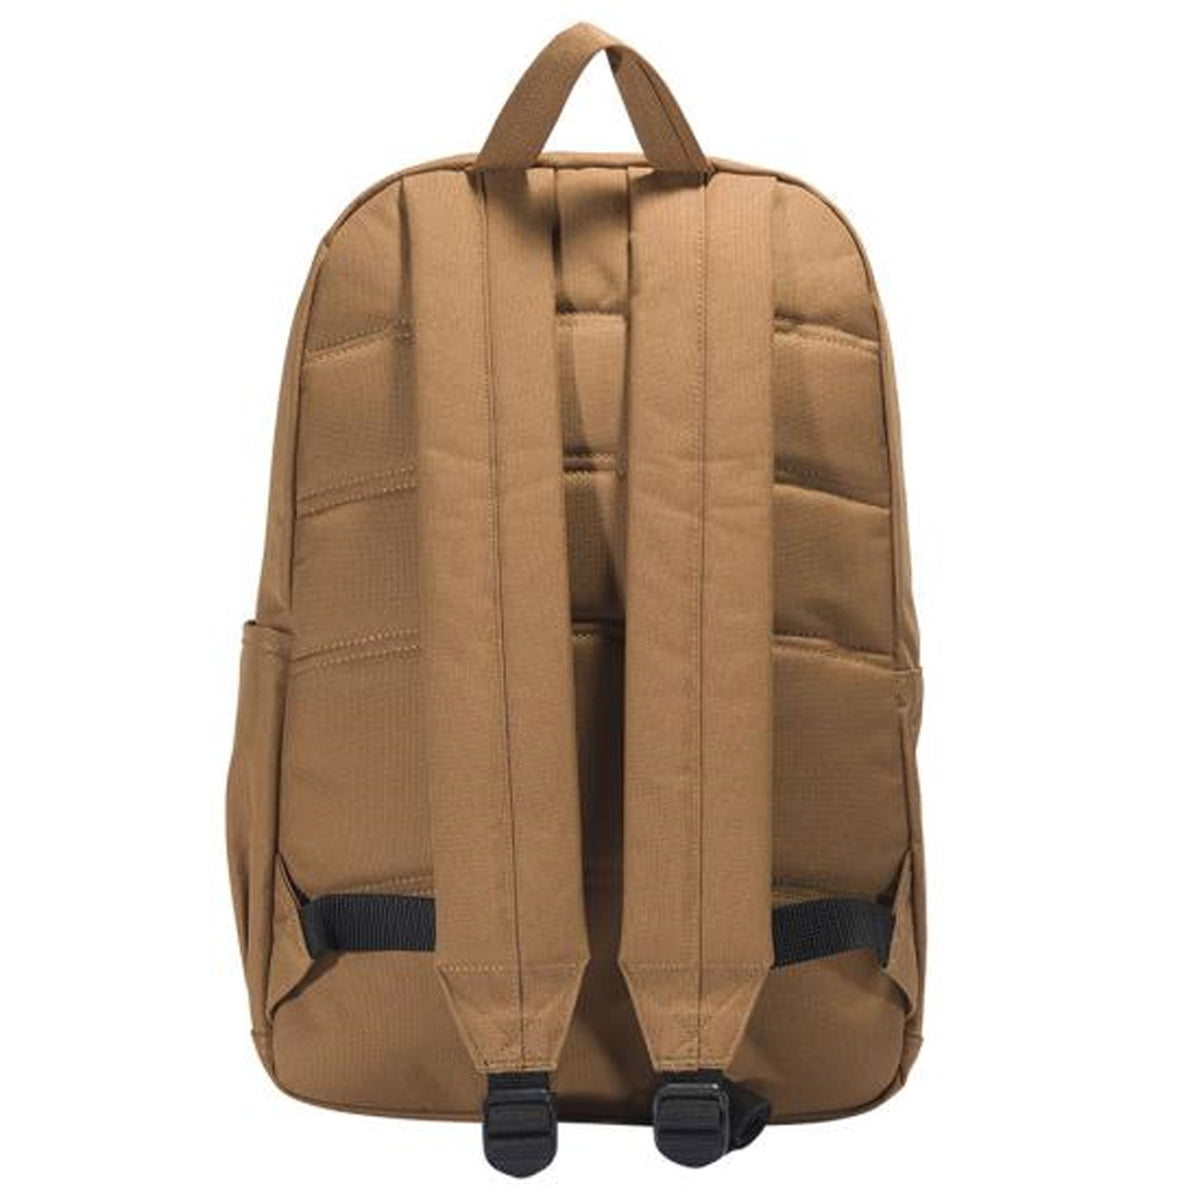 Carhartt 21L Classic Laptop Backpack - Work World - Workwear, Work Boots, Safety Gear